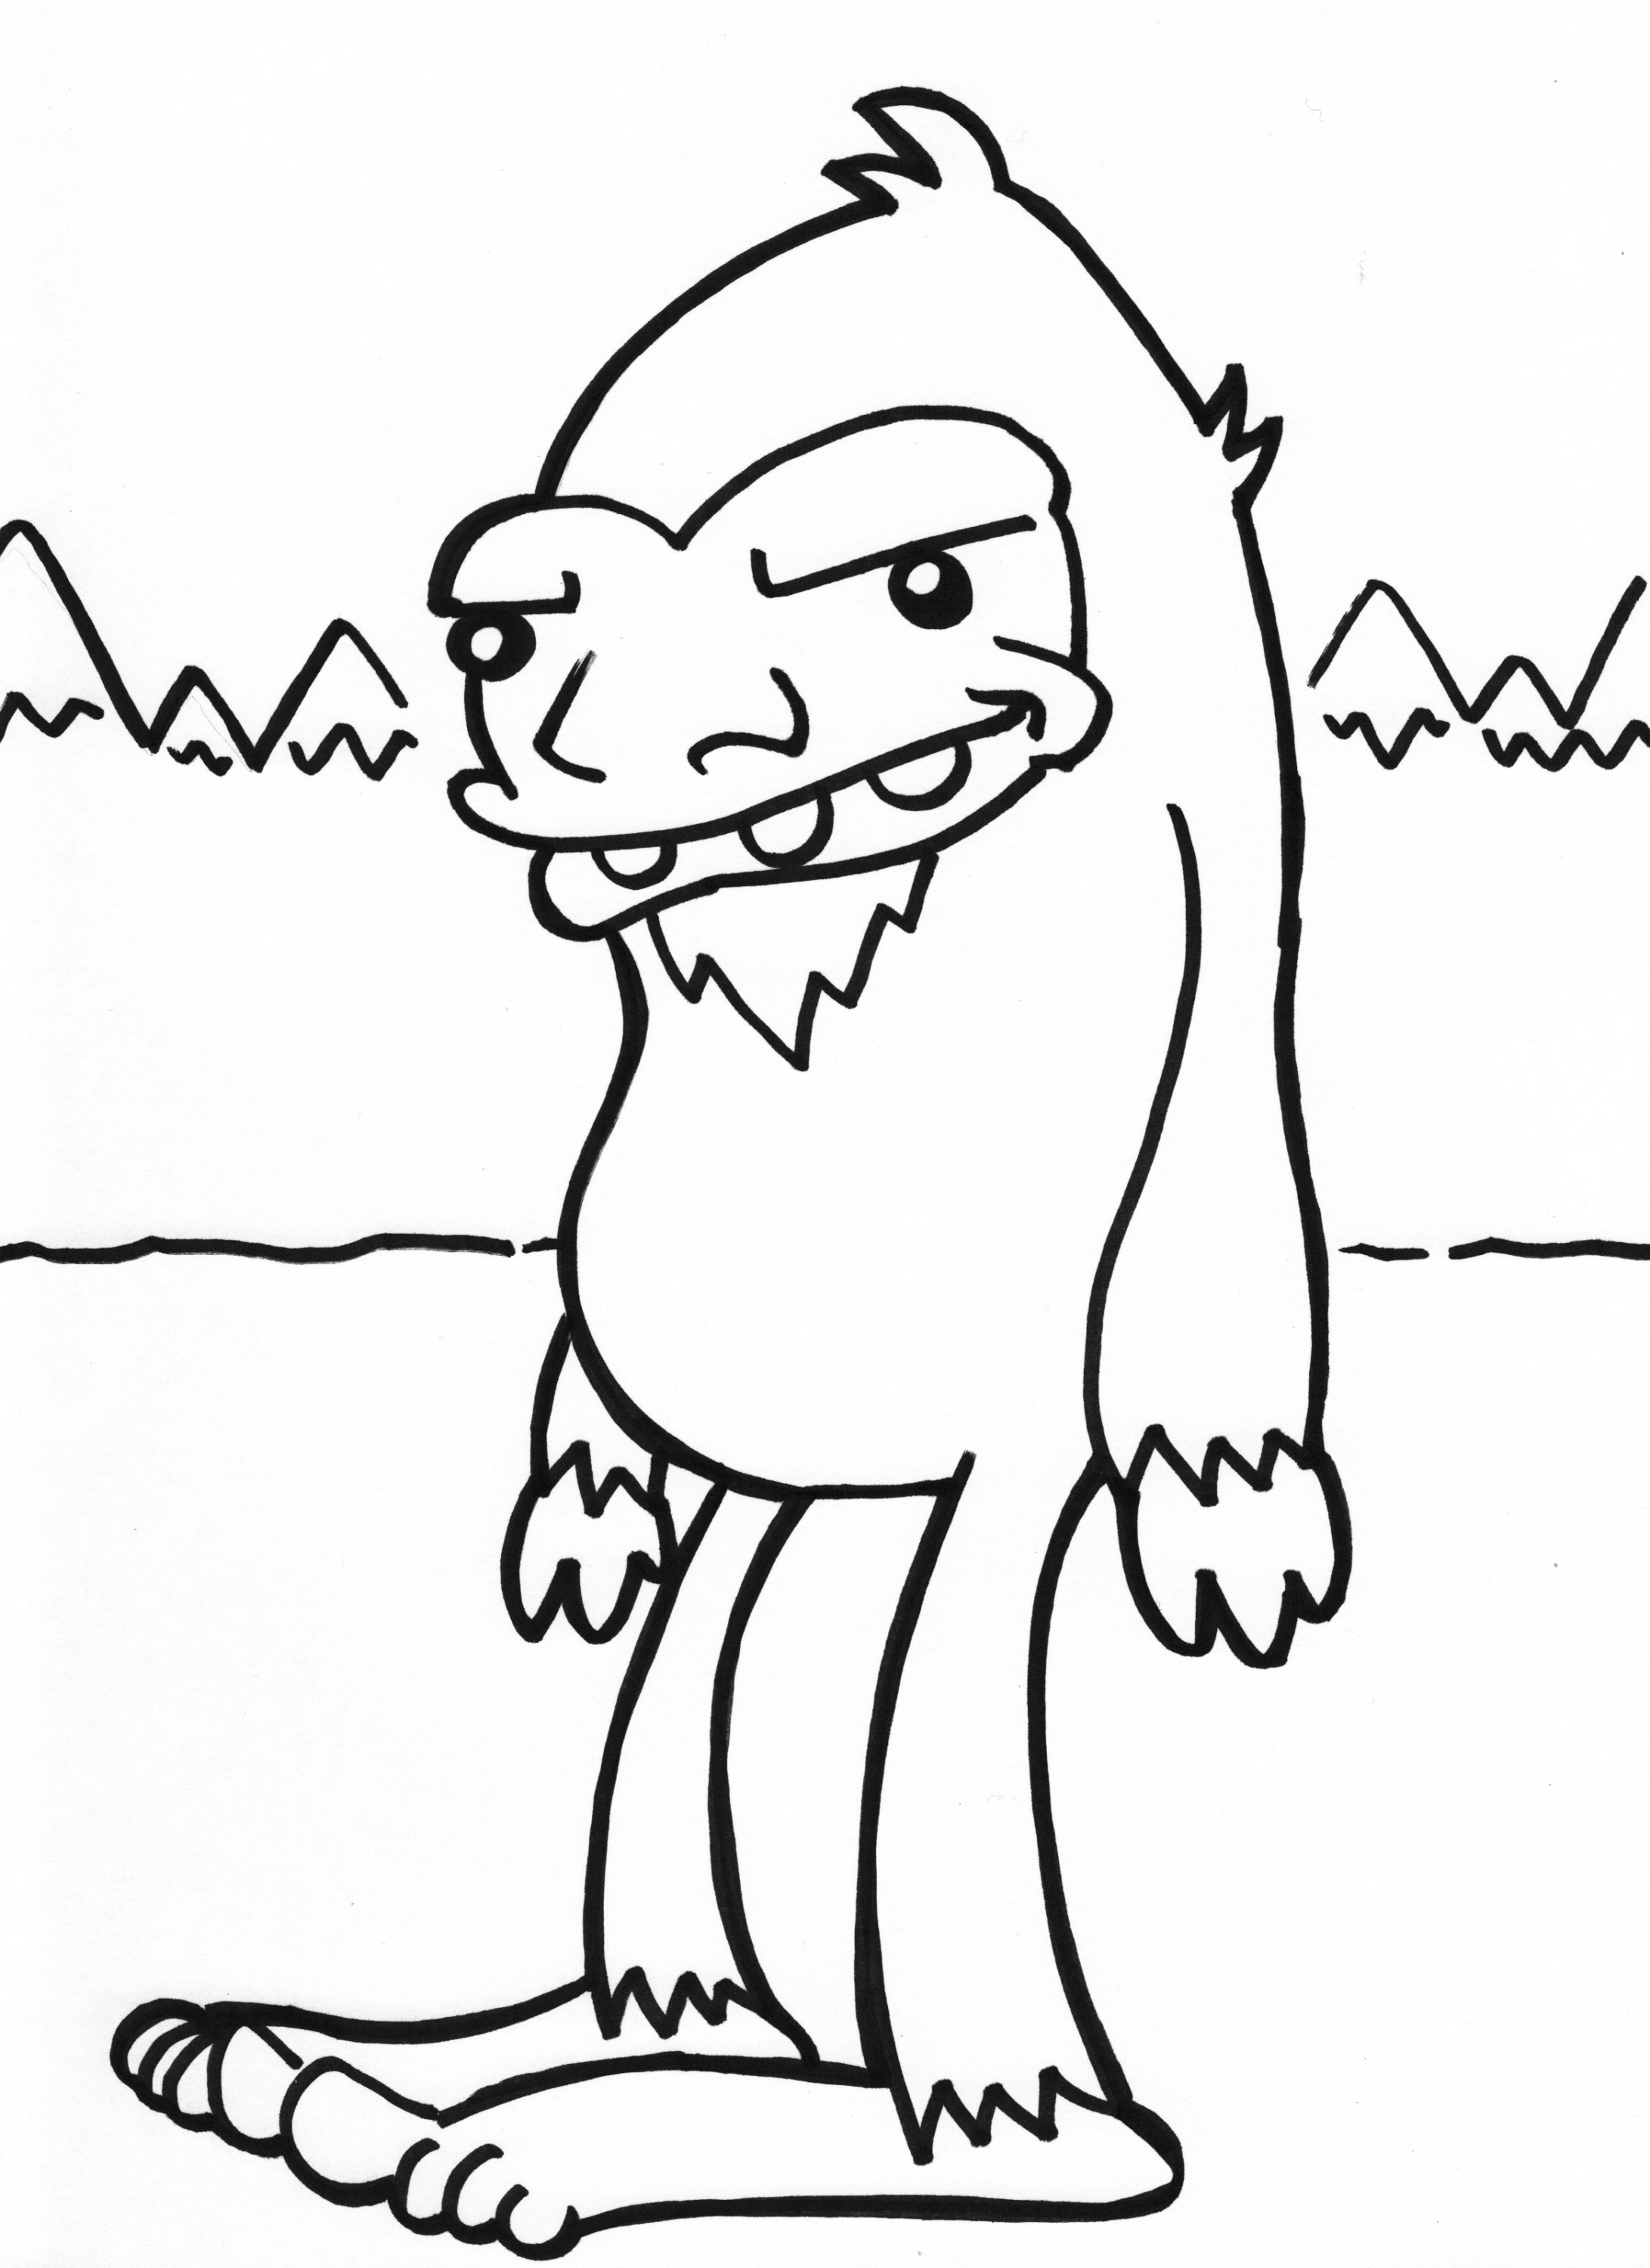 Sasquatch coloring #18, Download drawings